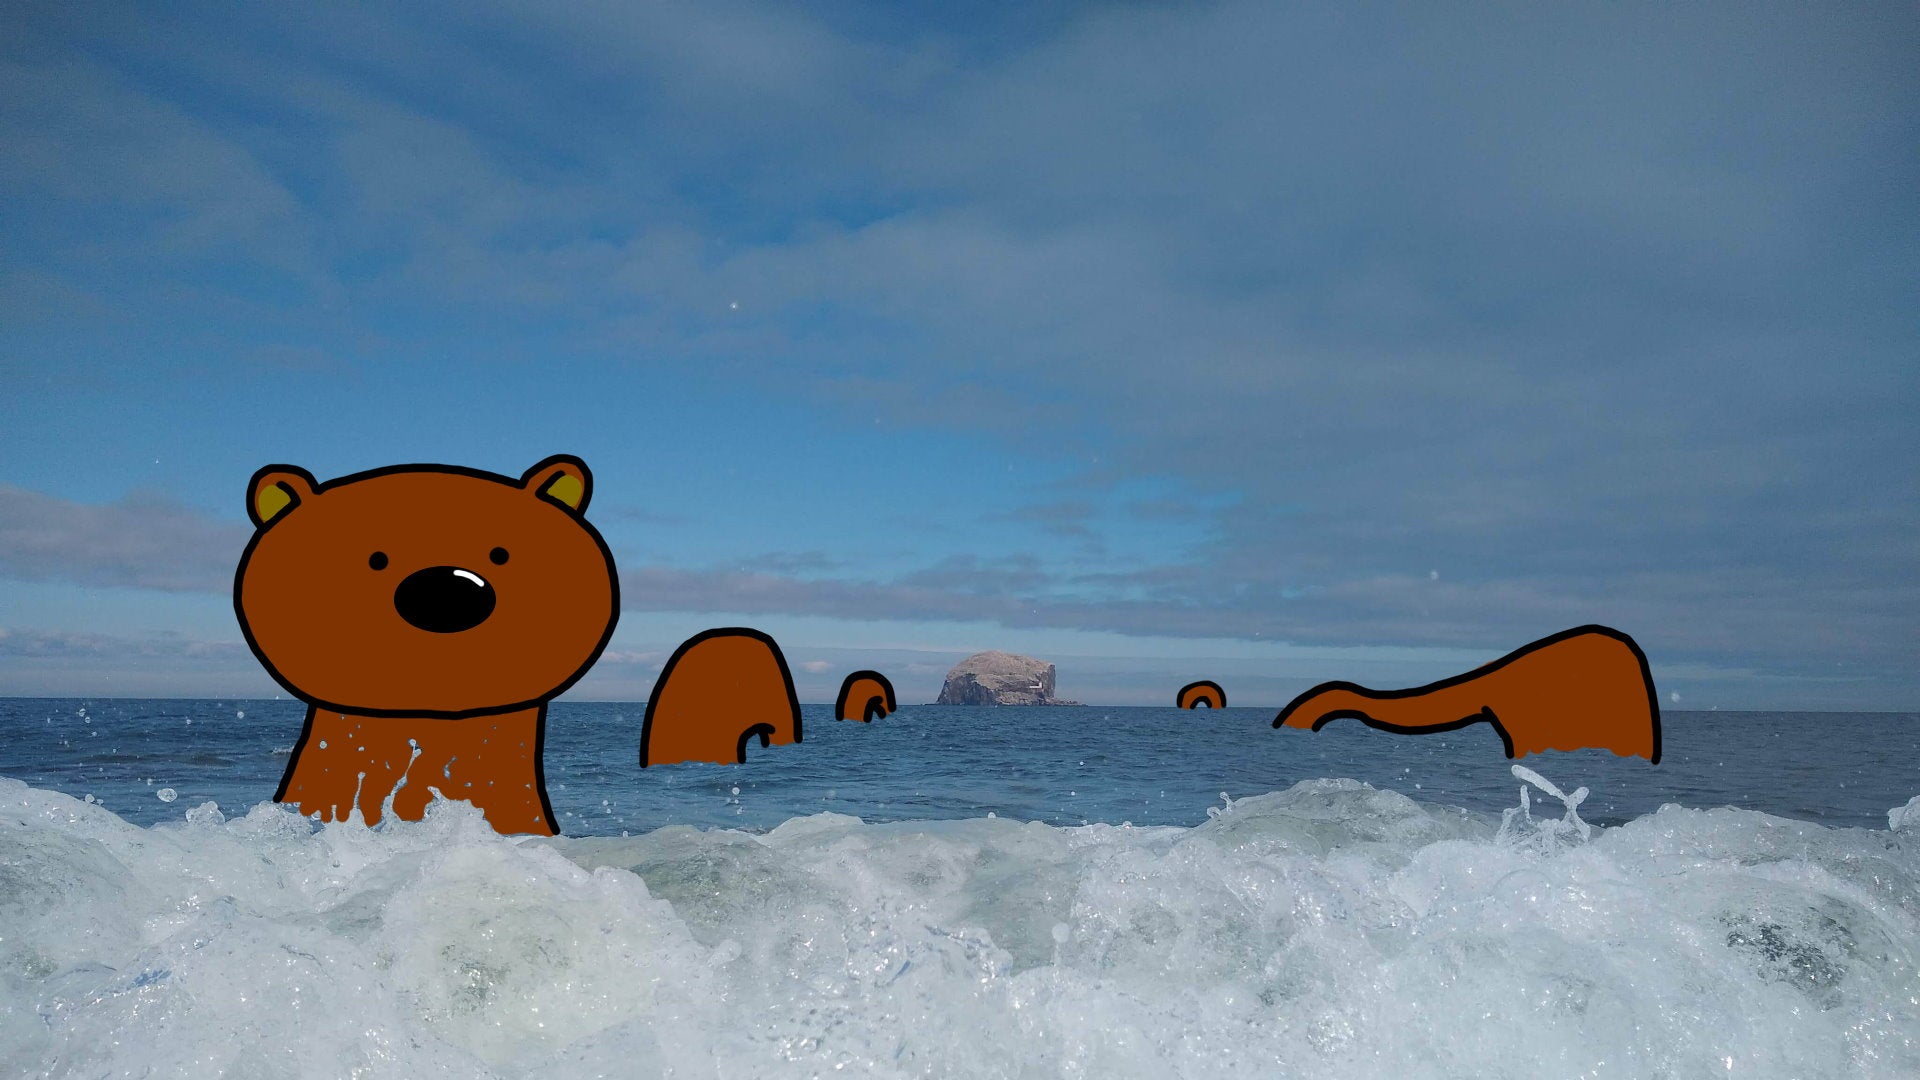 A seaside scene with Horace the endless brown bear looping in and out of the water